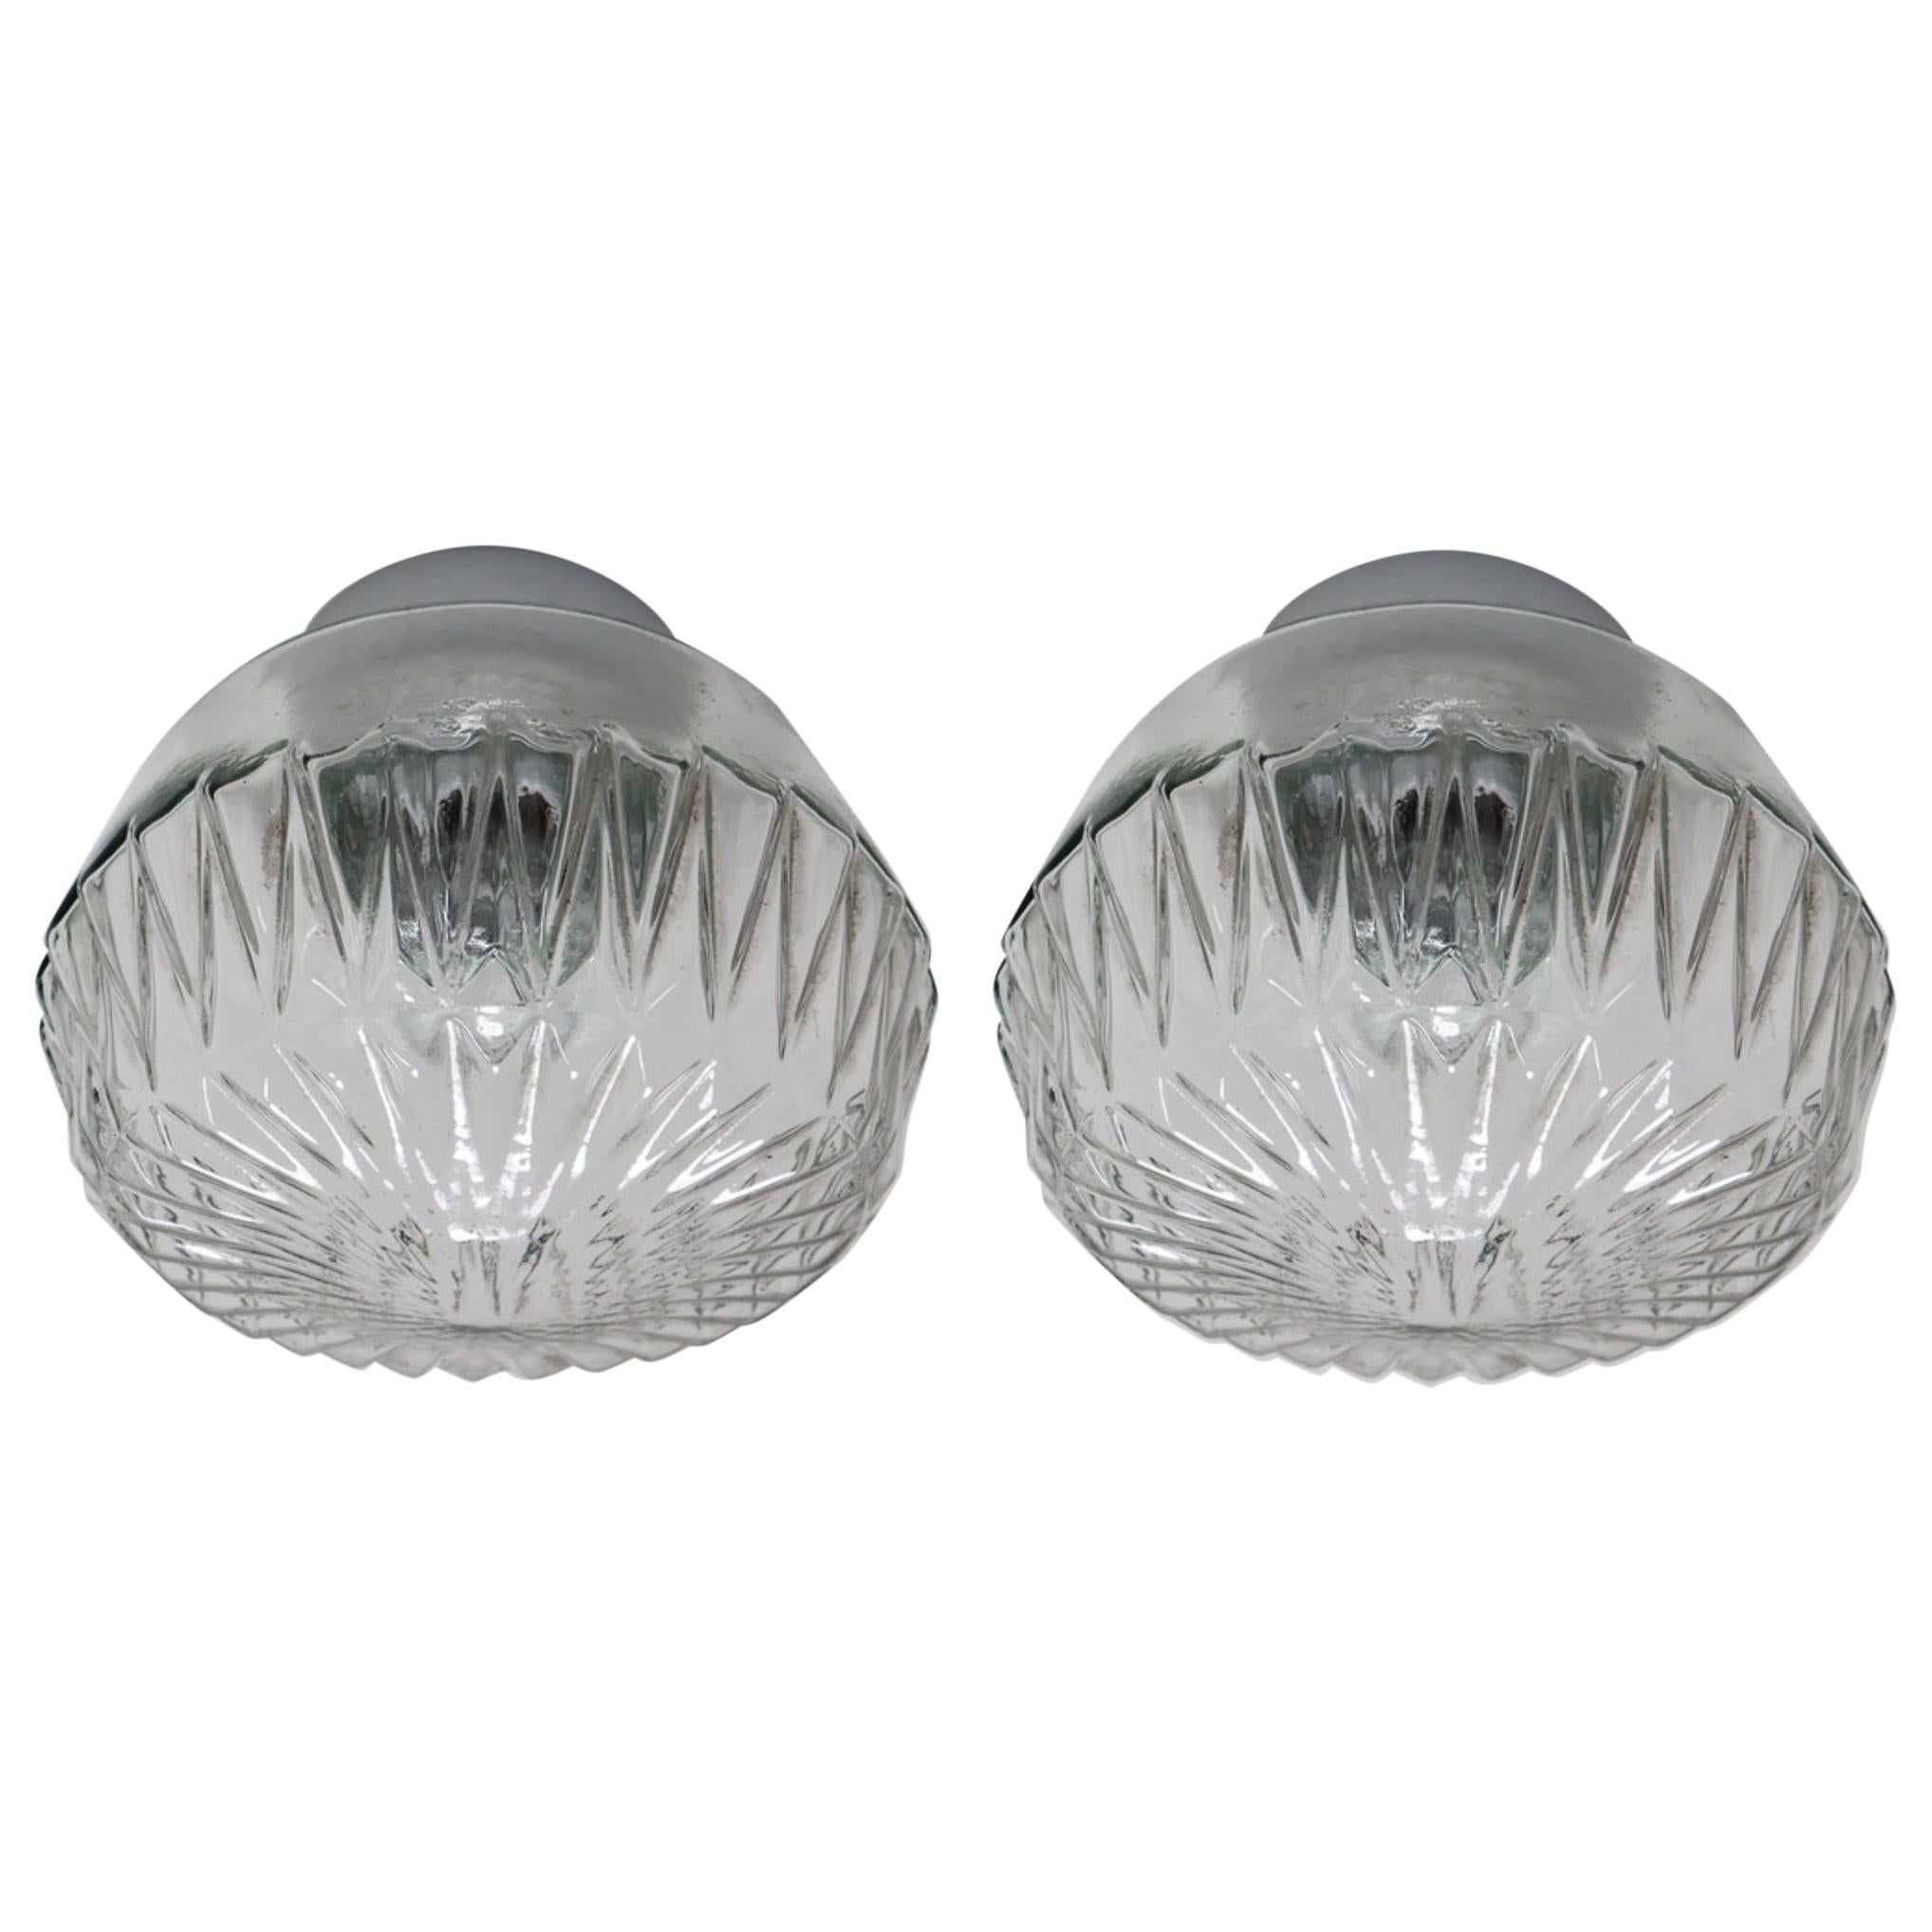 Set Vintage Wall/Ceiling Lights with Clear Structured Glass Porcelain Base